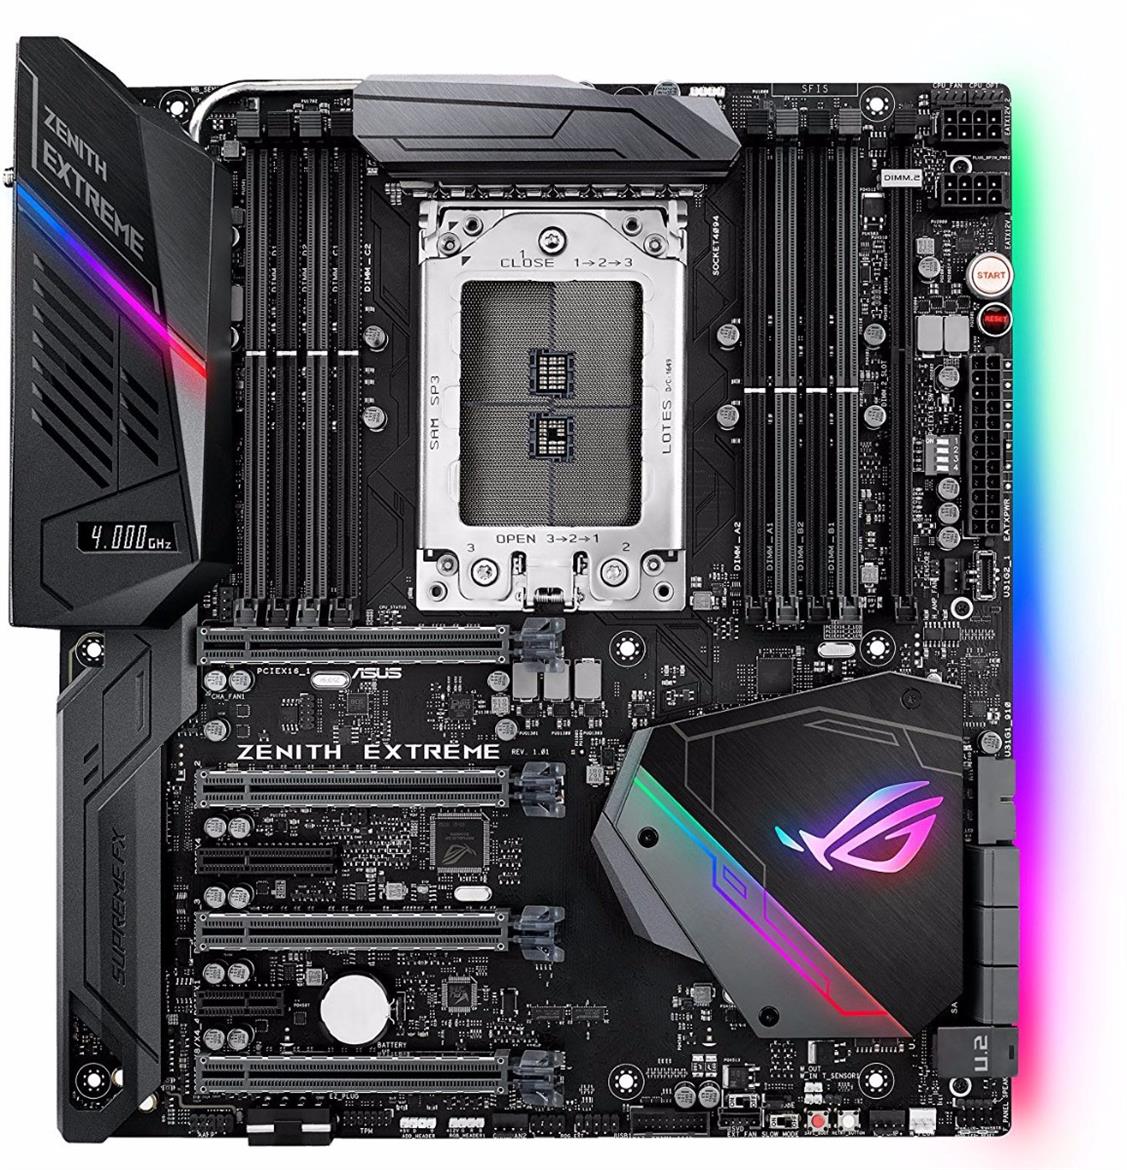 AMD Ryzen Threadripper Processors And X399 Motherboard Pre-Orders Are Live!